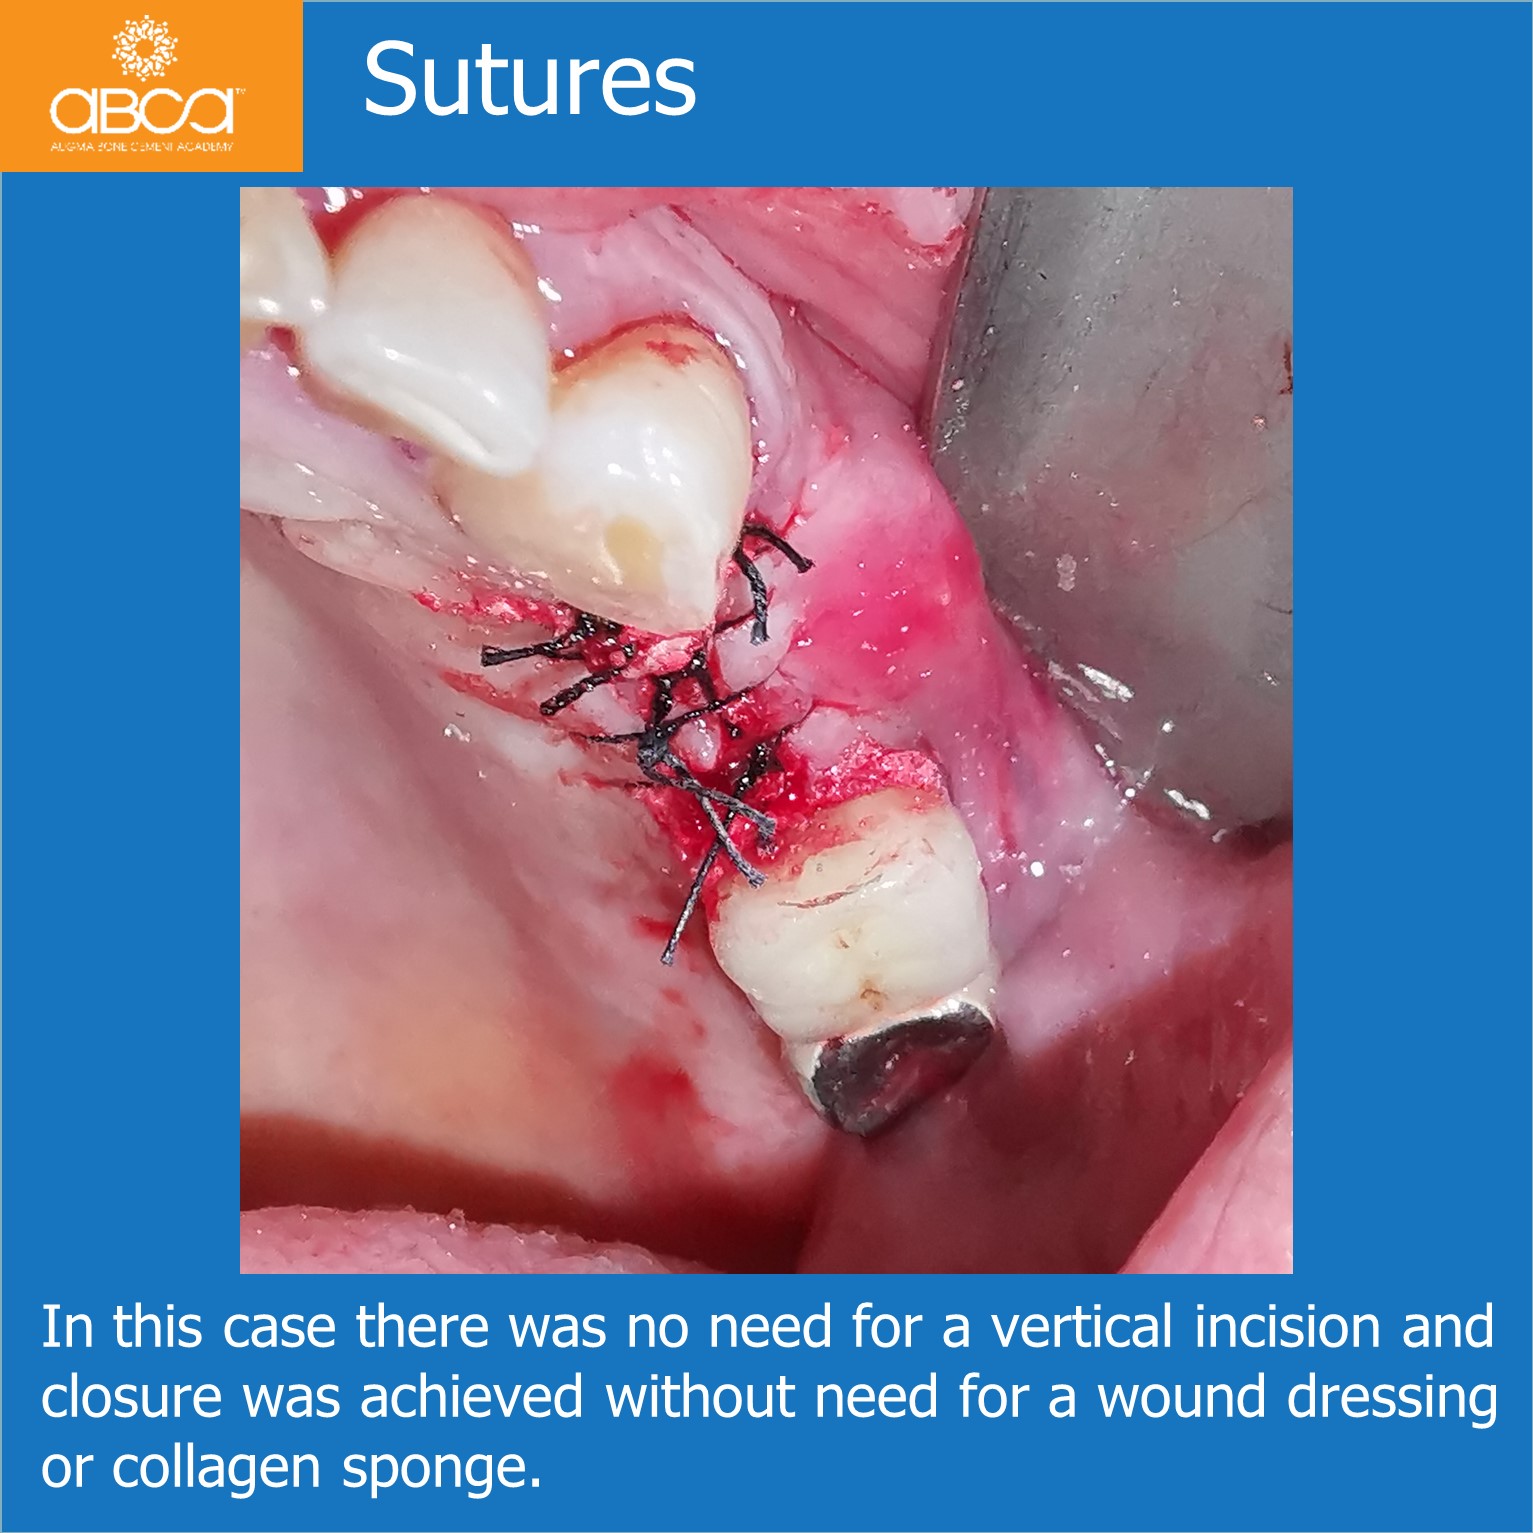 Sutures - In this case there was no need for a vertical incision and closure was achieved without need for a wound dress or collagen sponge